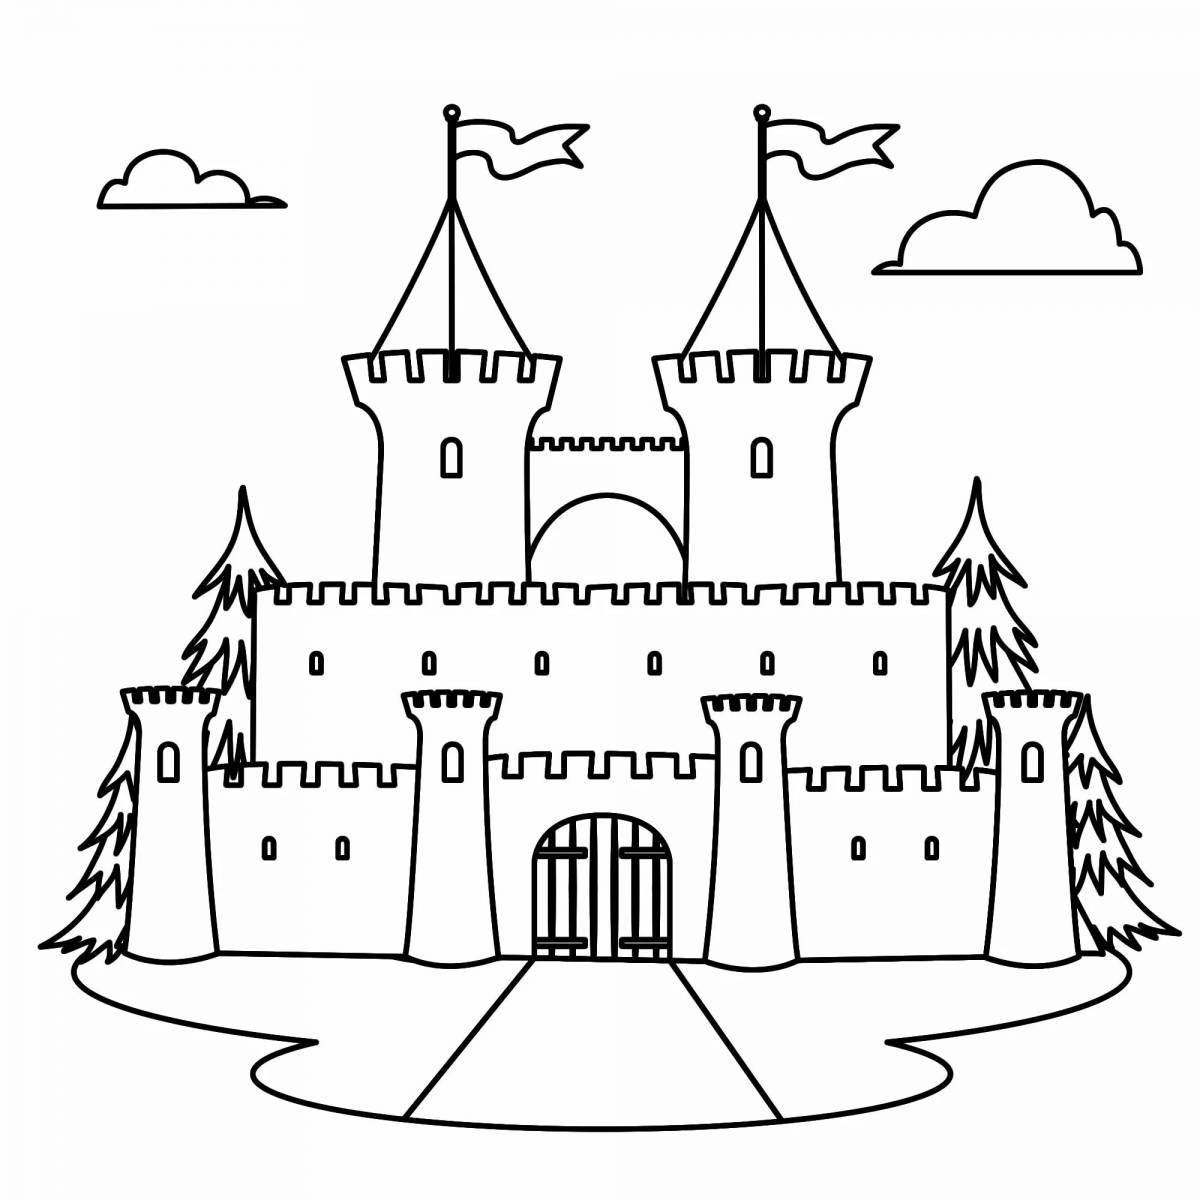 Visual castle coloring book for children 4-5 years old